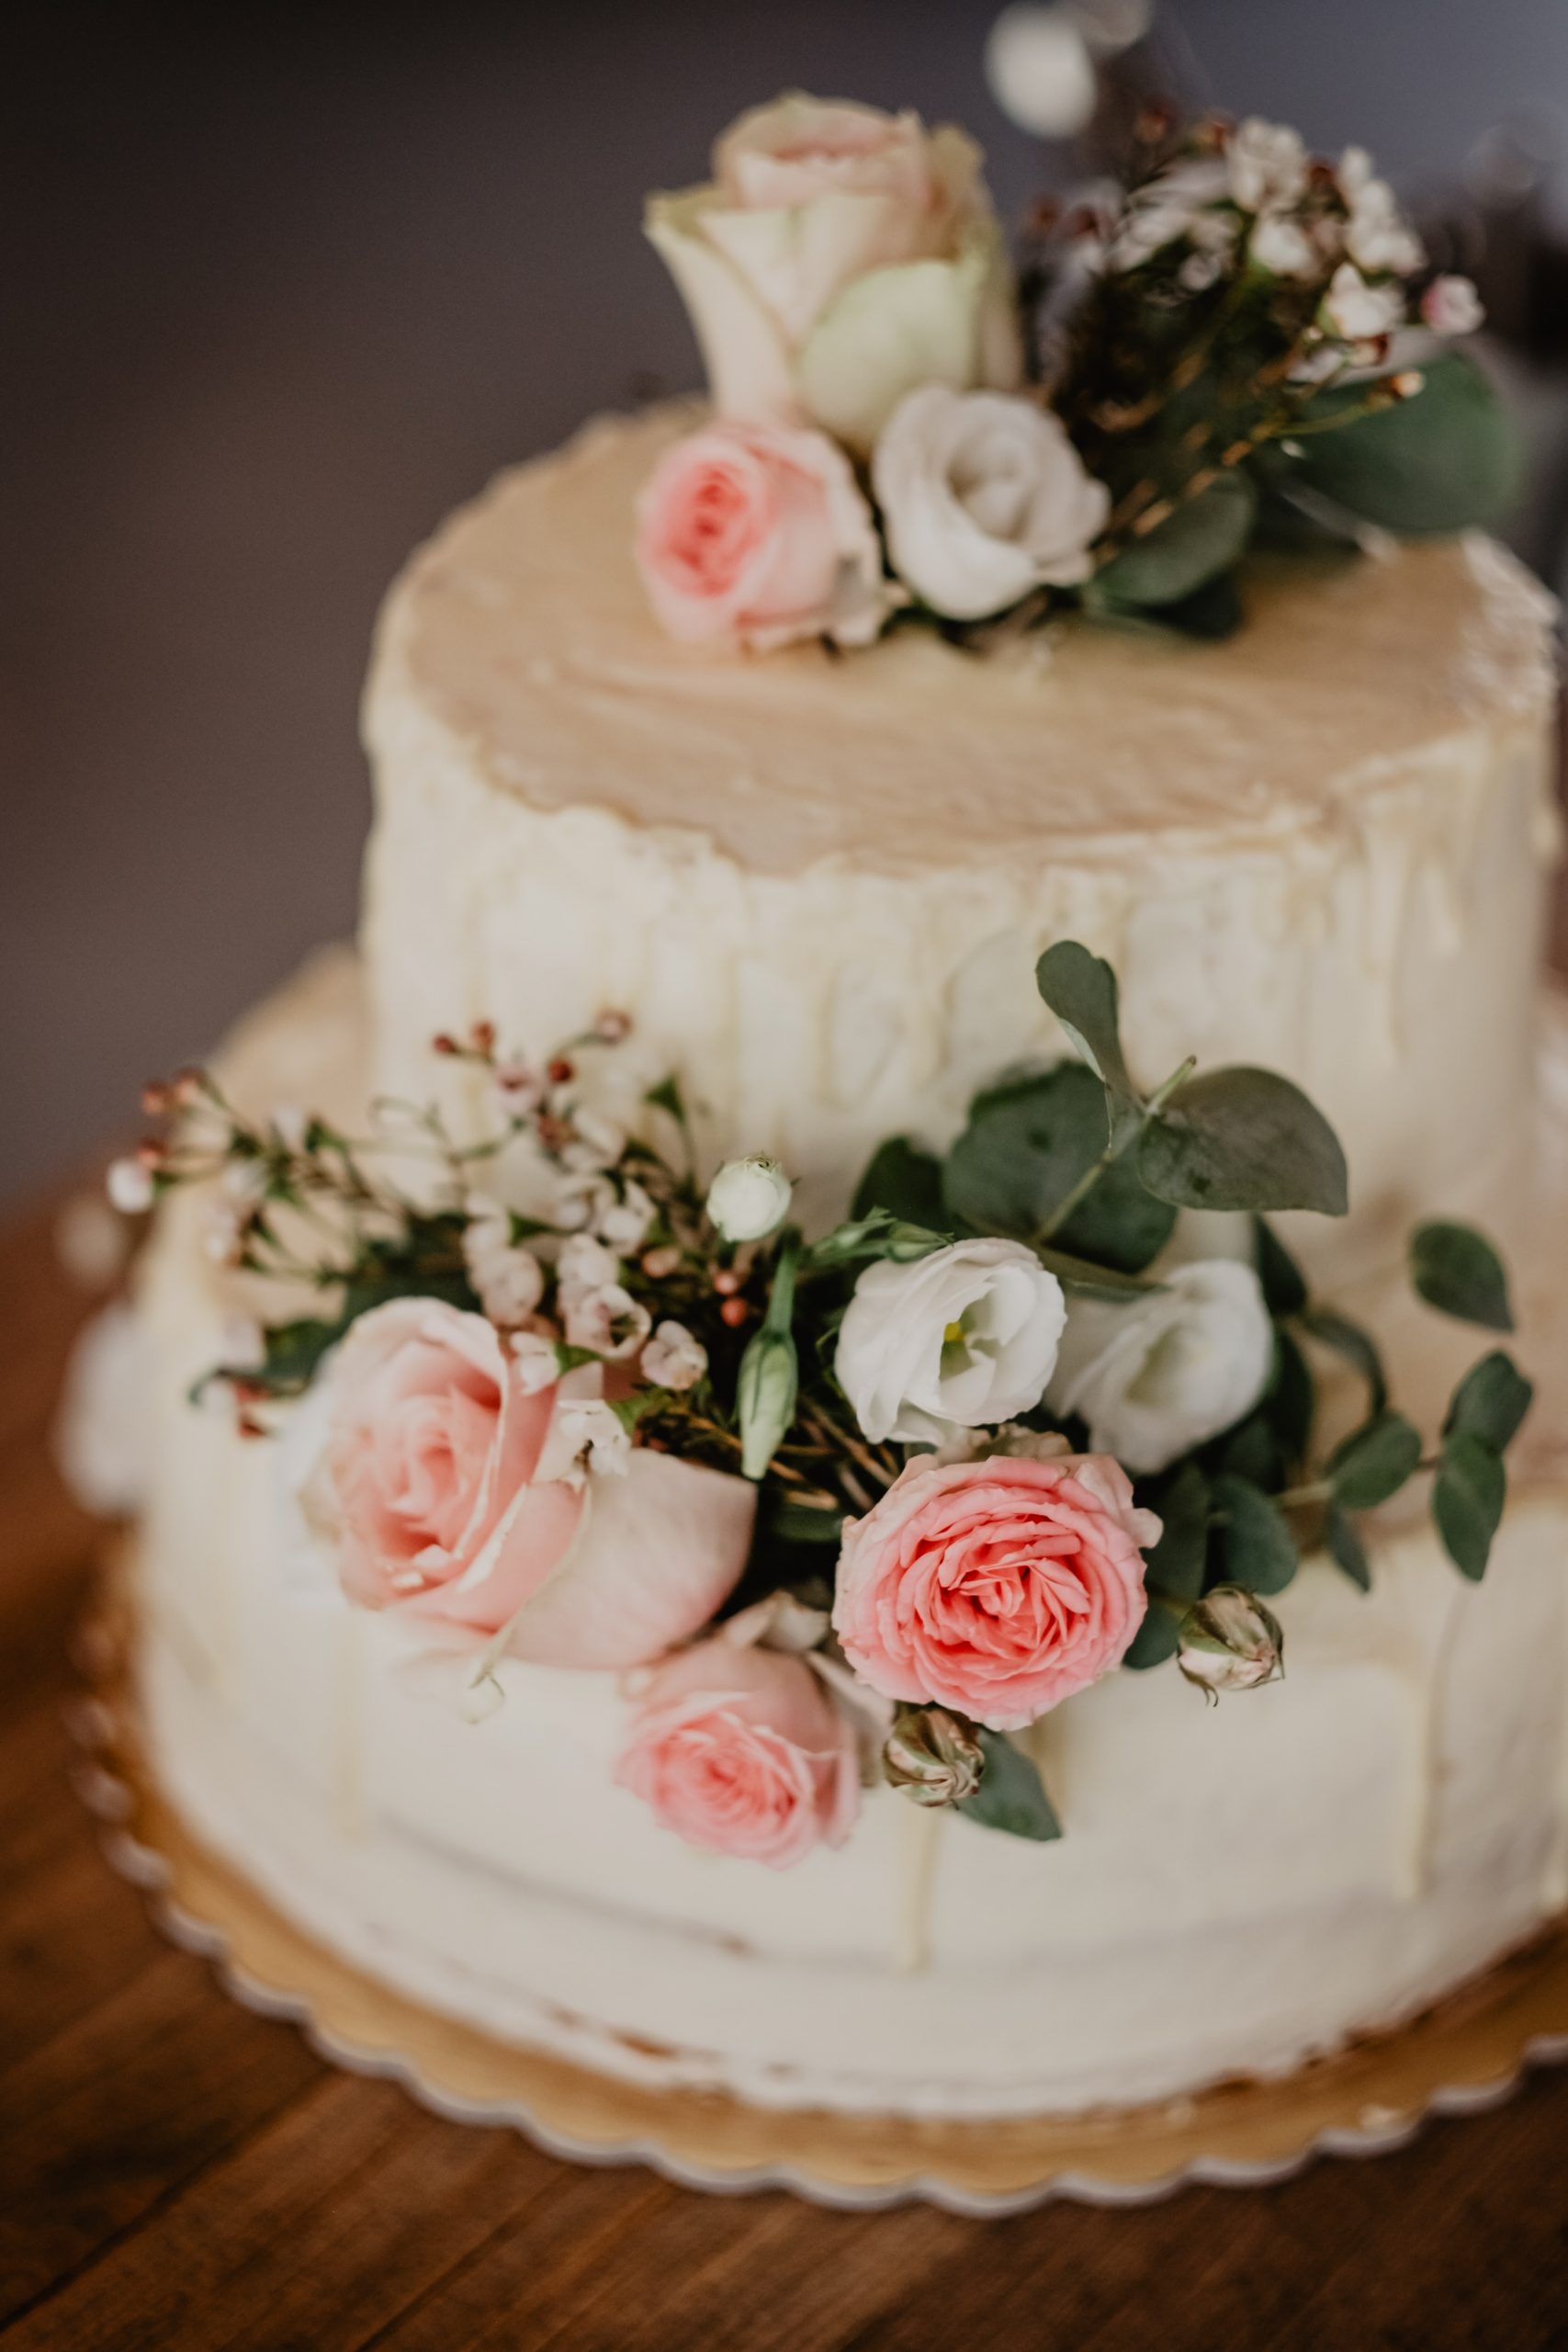 Getting married in 2022? Experts reveal the top five wedding cake trends